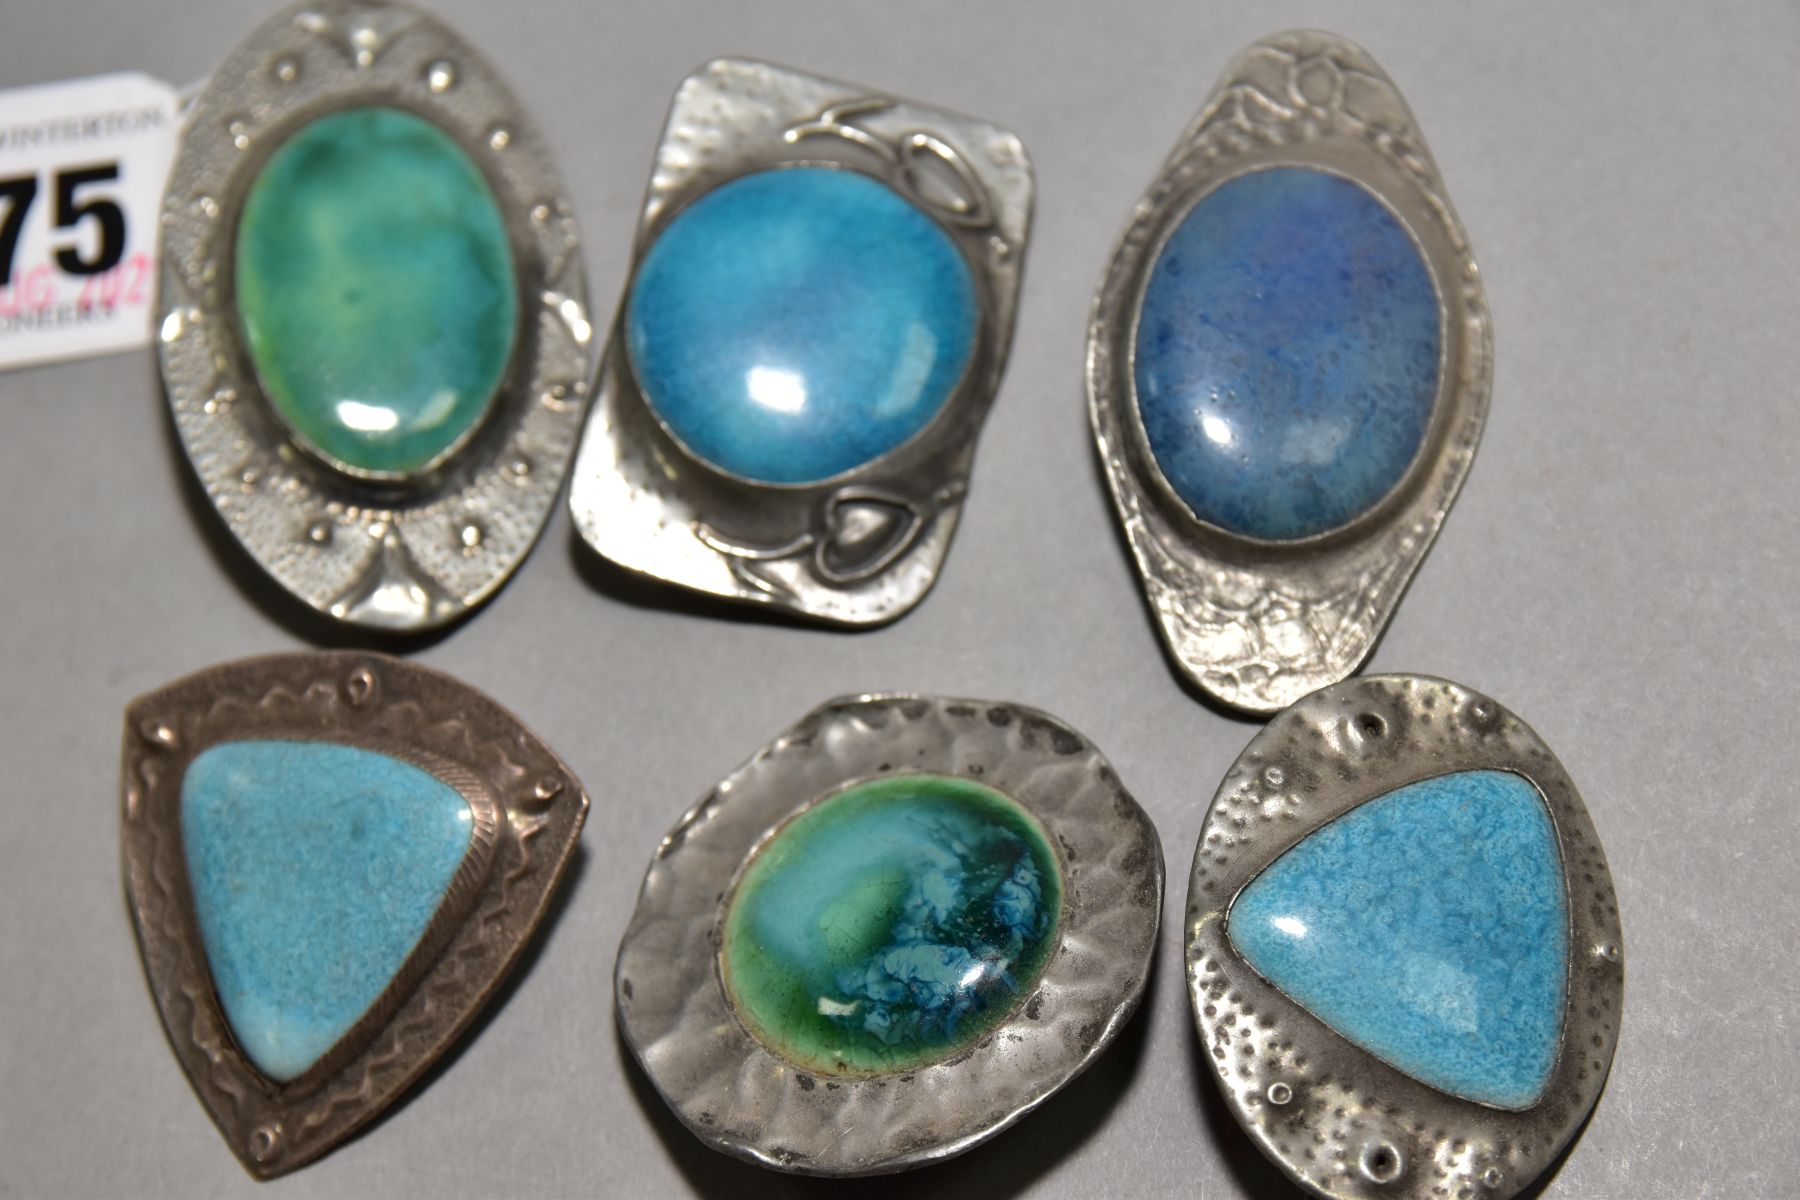 SIX RUSKIN STYLE BROOCHES, five enamels set into pewter, one stamped FTG hand wrought, one enamel - Image 2 of 3